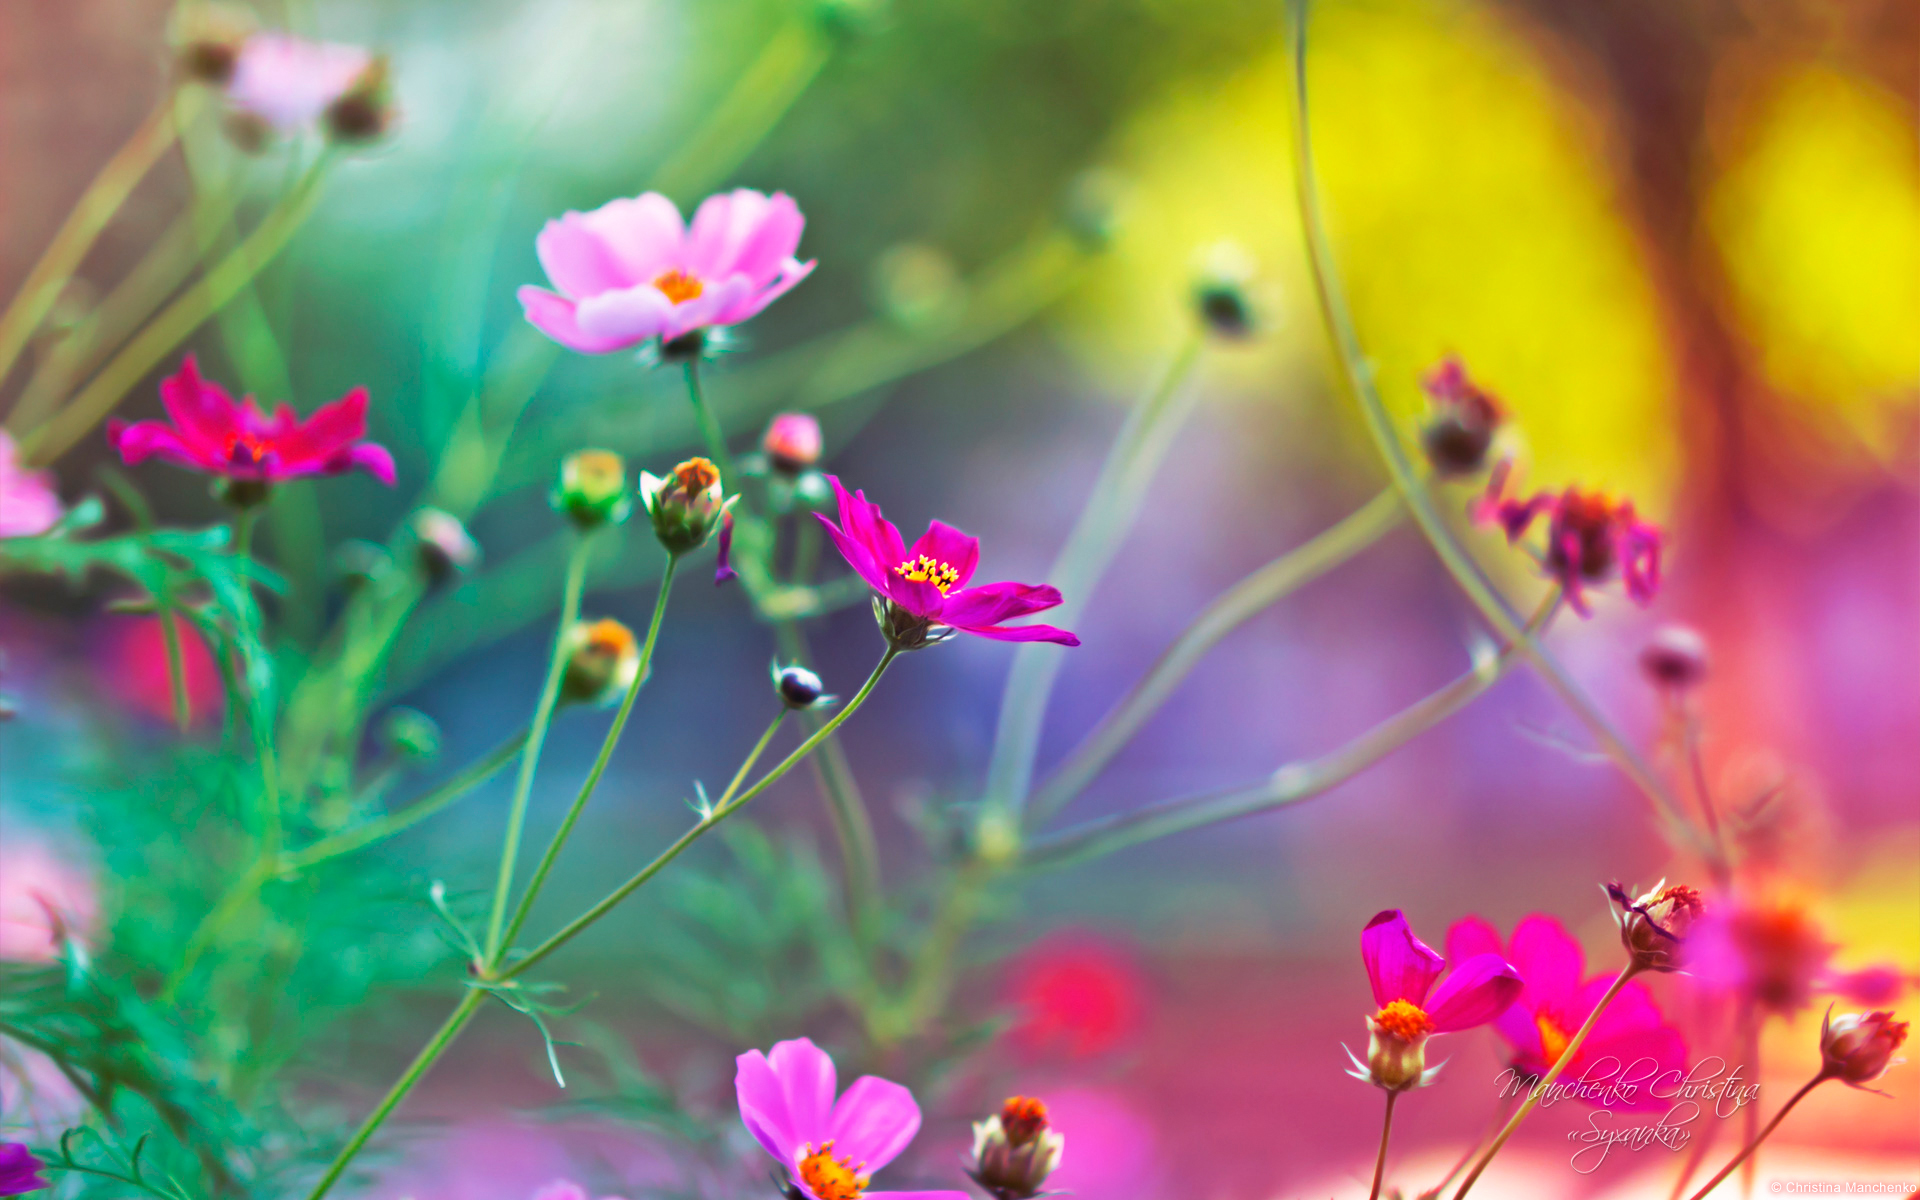  flower wallpaper for Windows 8   HQ Wallpapers   HQ Wallpapers